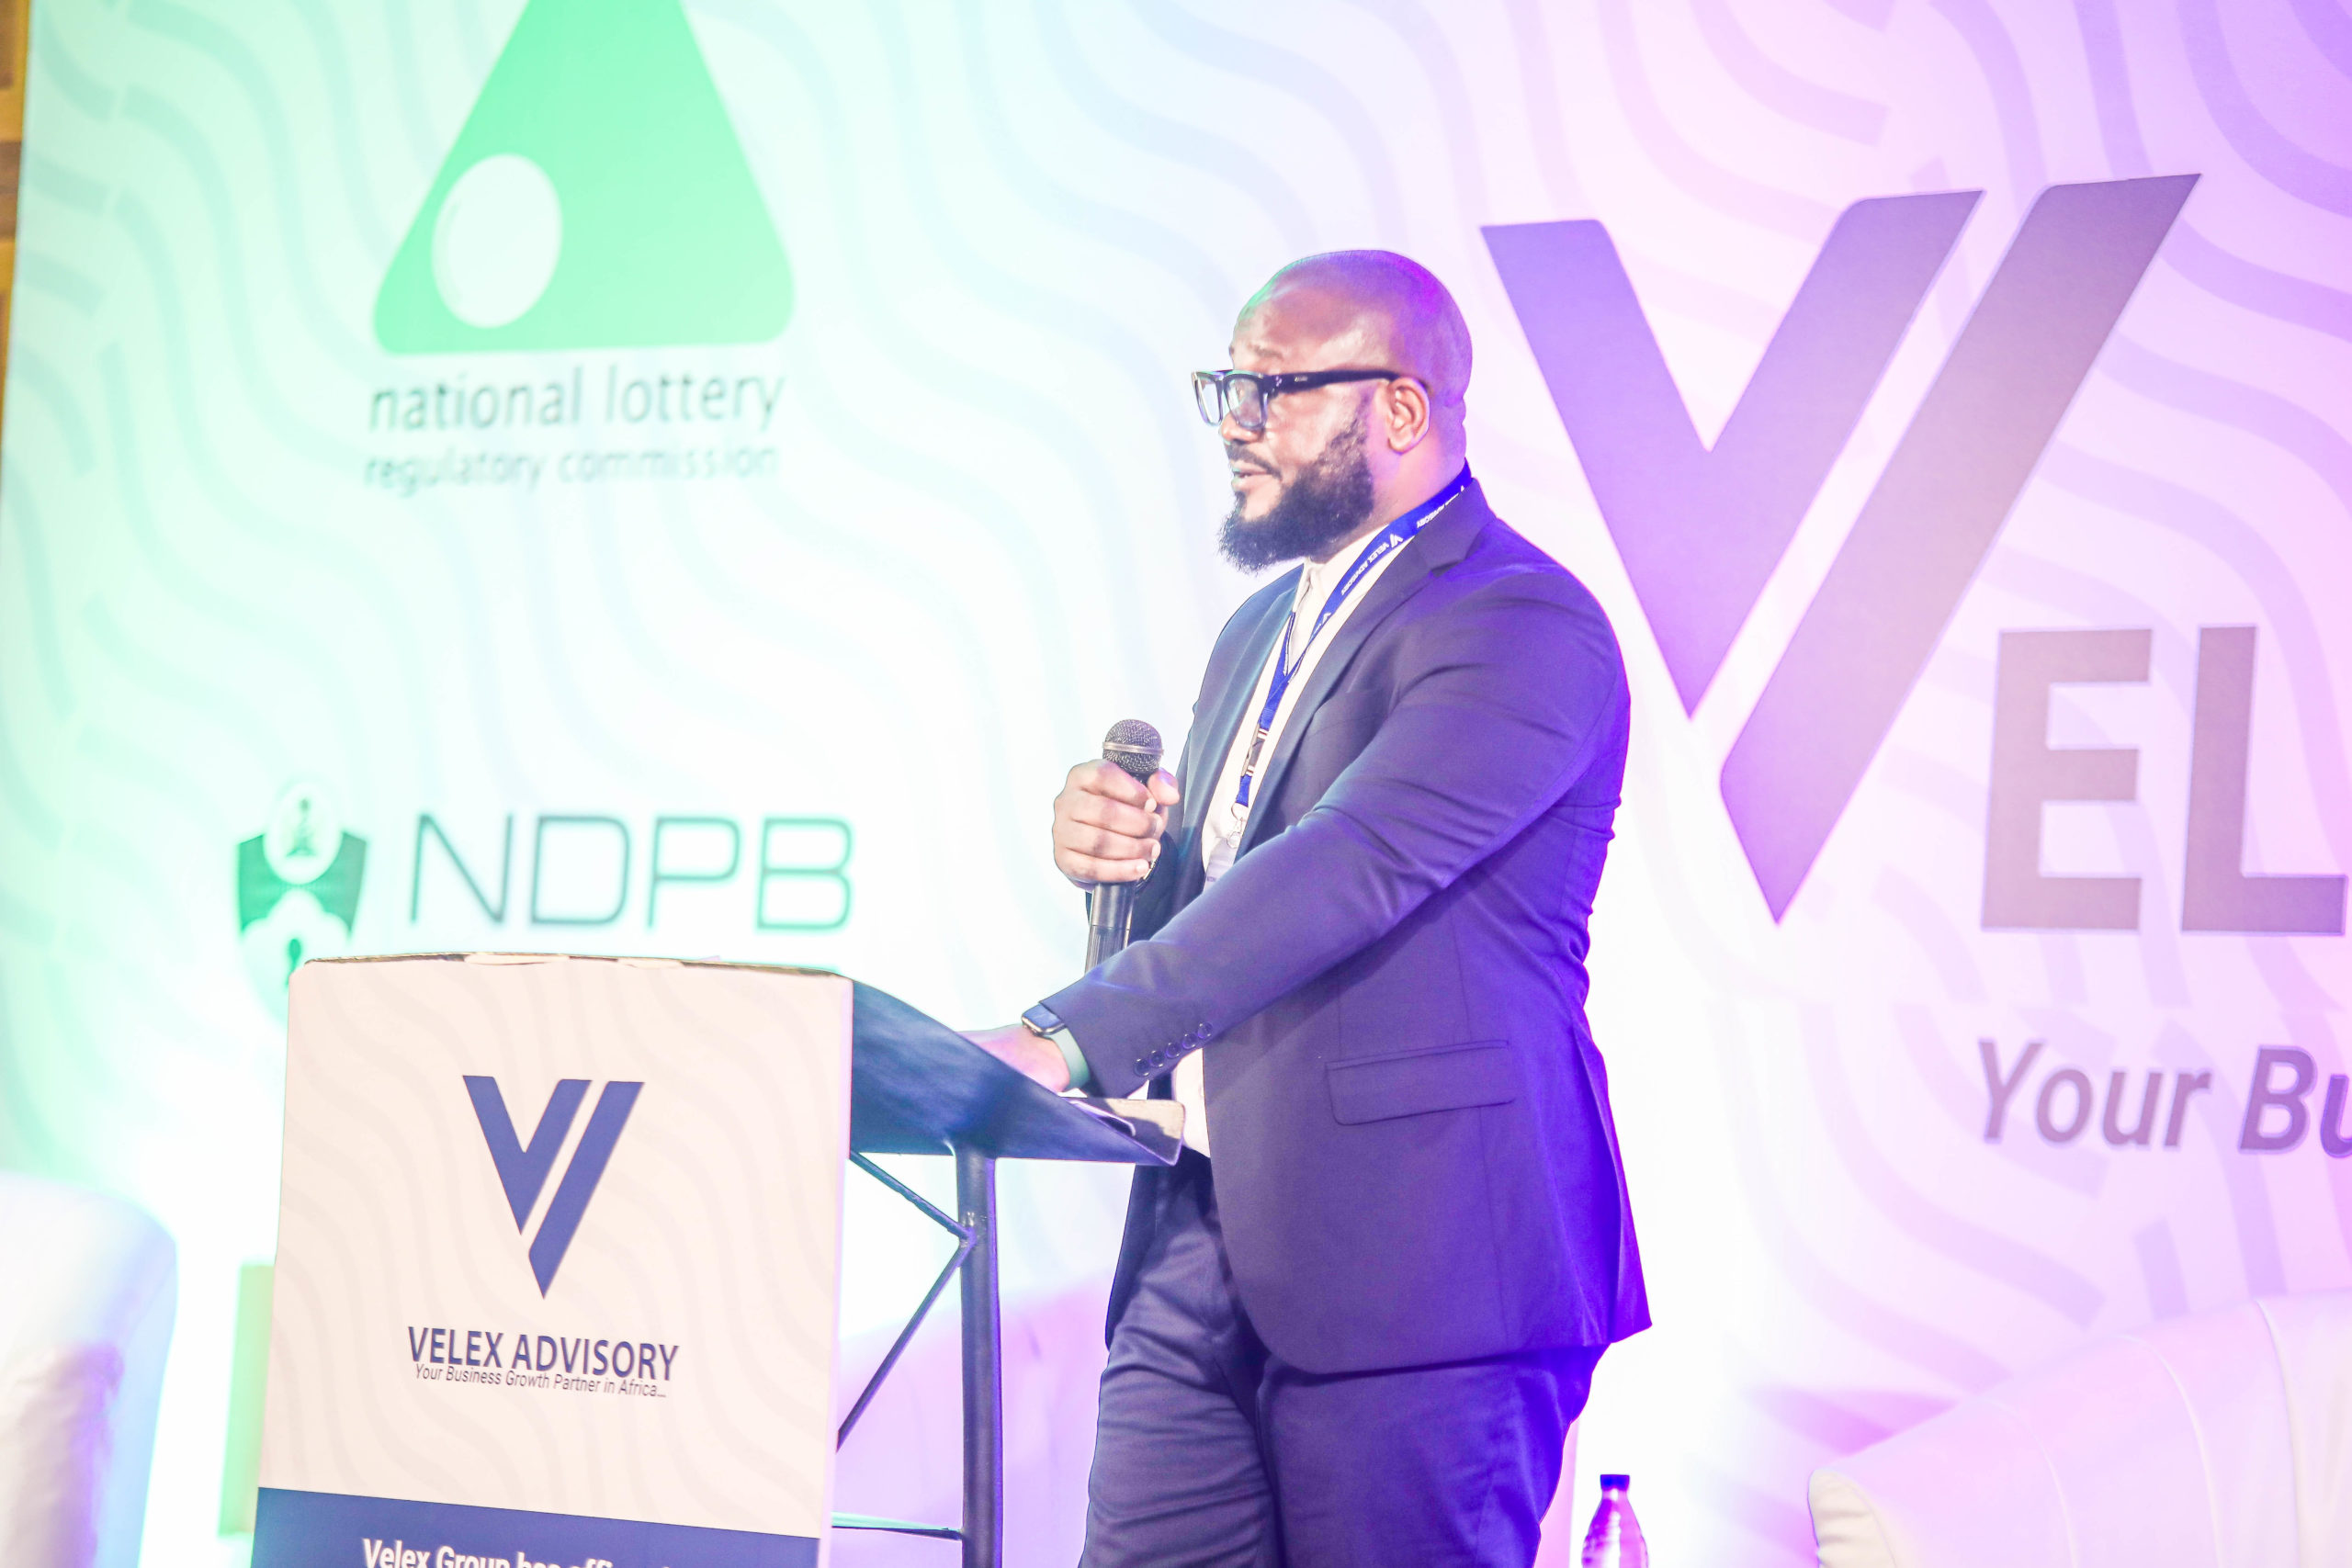 KYC, Data Security and Compliance Metrics in the Nigerian Gaming Industry